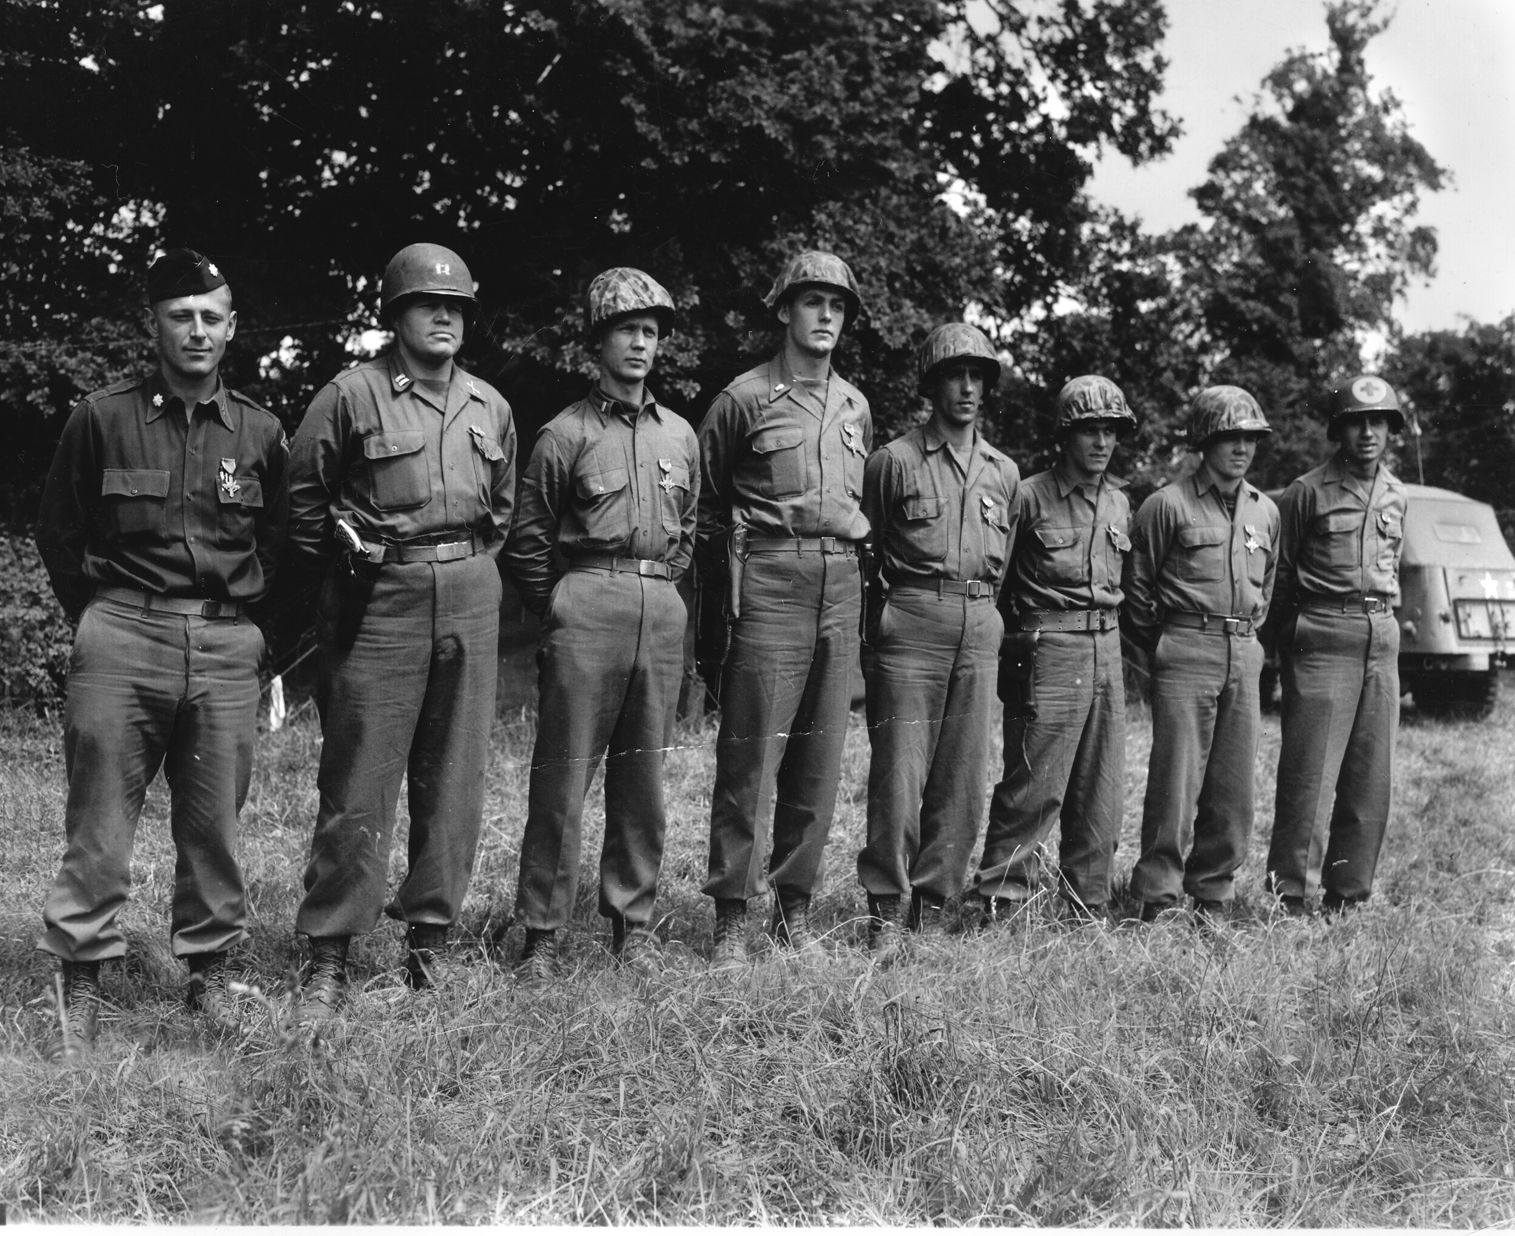 Ten Army Rangers received the Distinguished Service Cross for gallantry during the seizure of Pointe du Hoc on D-Day. Eight of the recipients are pictured here, including Lieutenant Colonel James E. Rudder, commander of the 2nd Ranger Battalion, standing at far left.